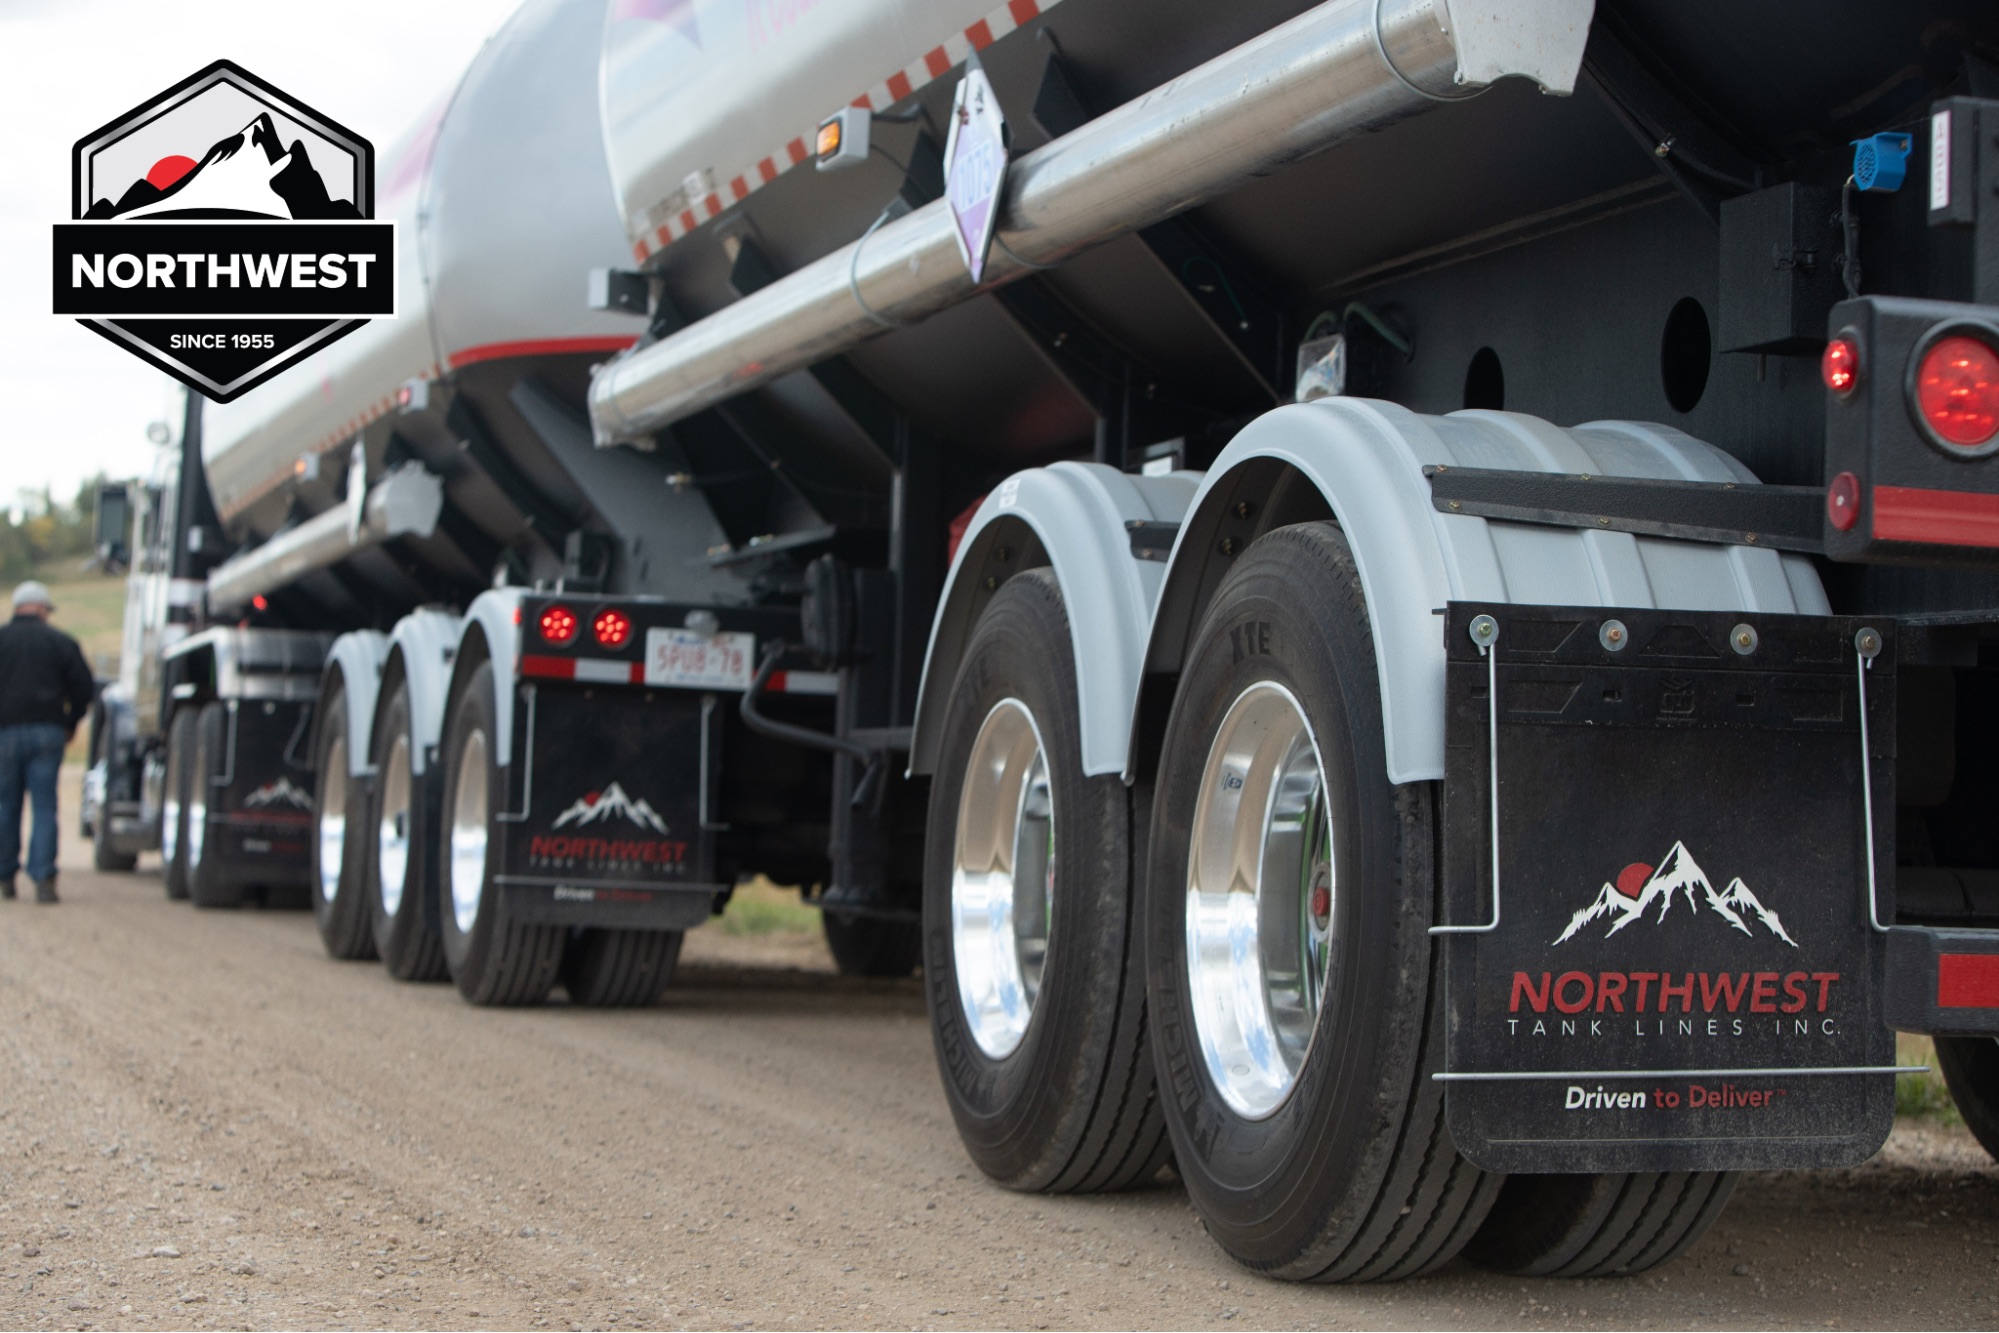 Benefits of Using Northwest Tank Lines for Your Tank Trucking Needs